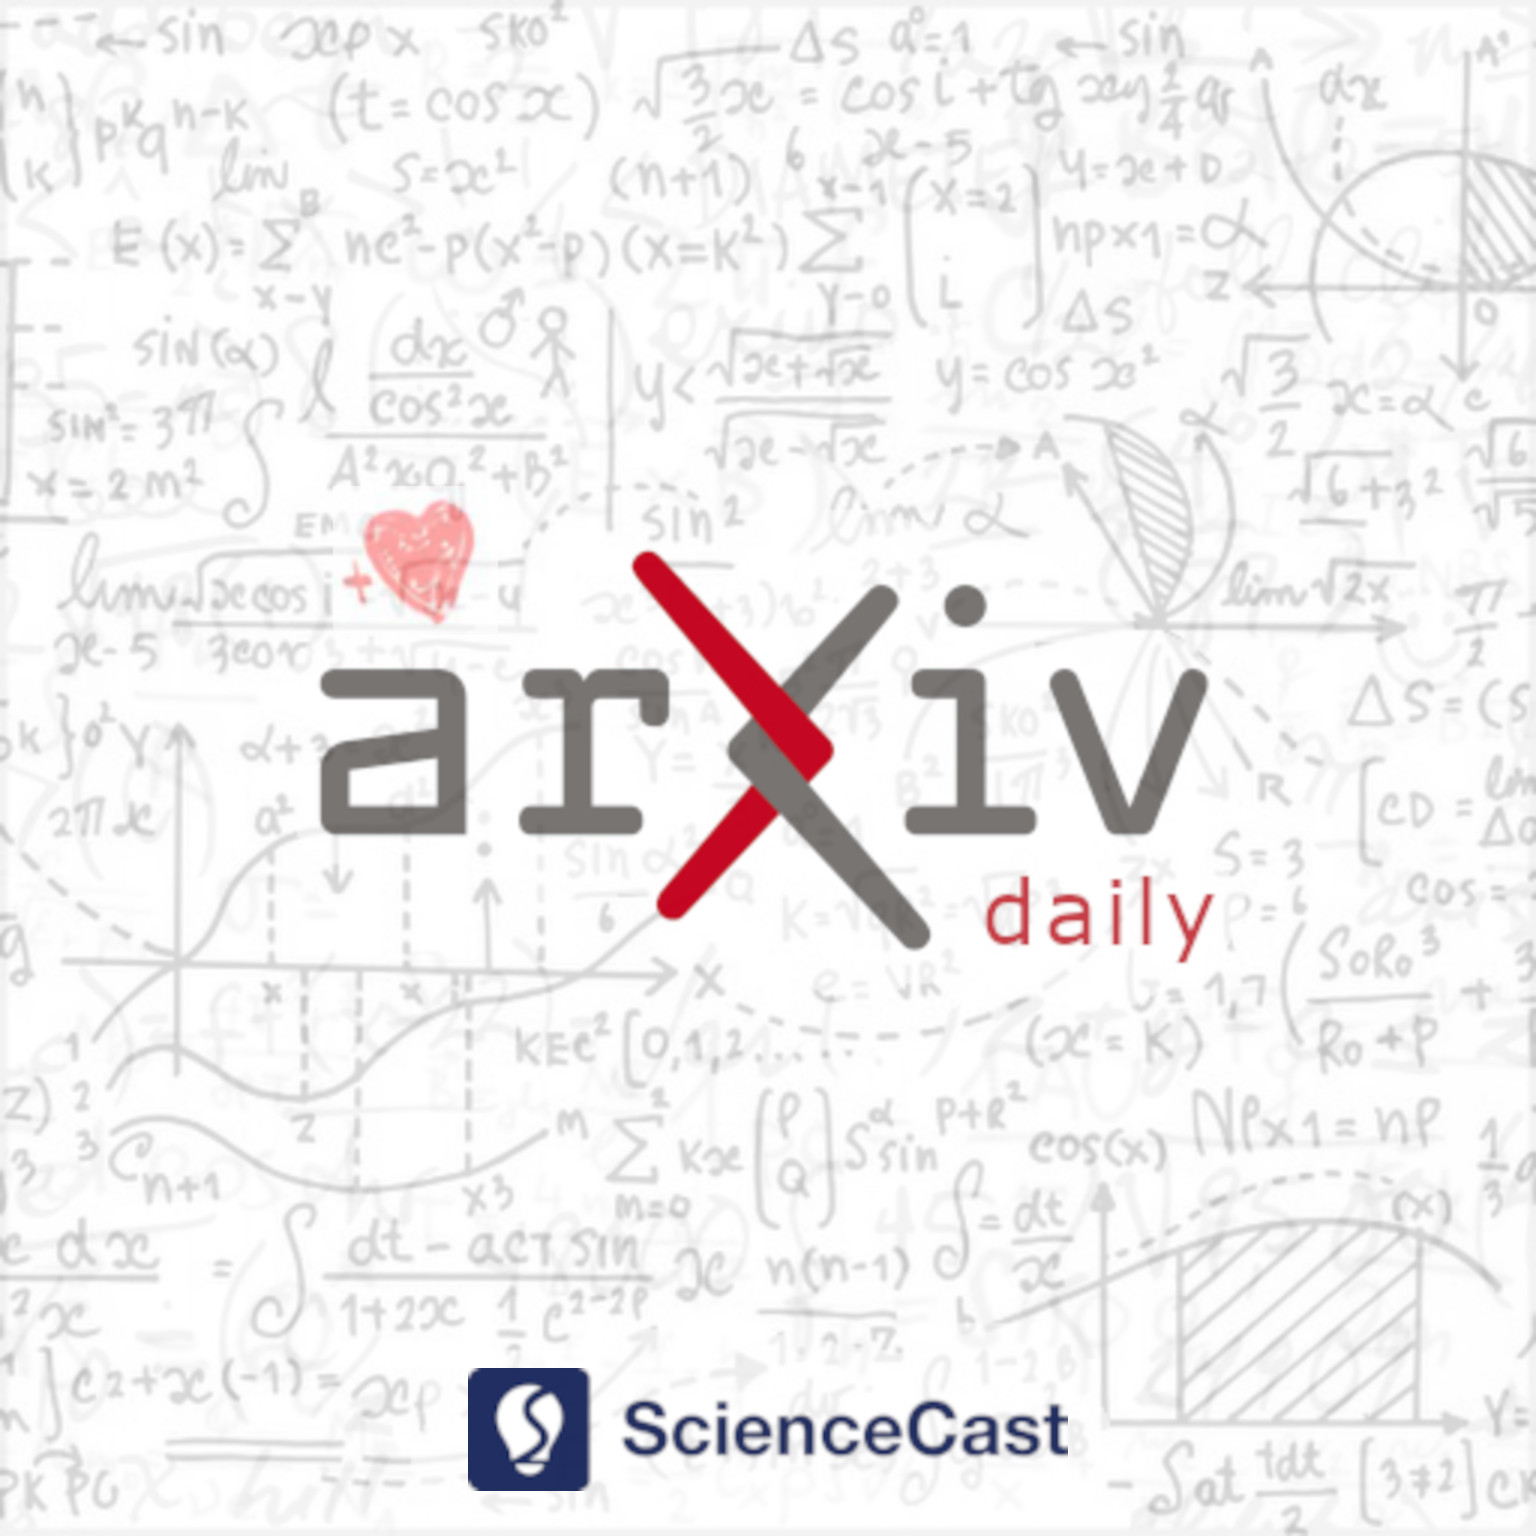 arXiv daily: Populations and Evolution